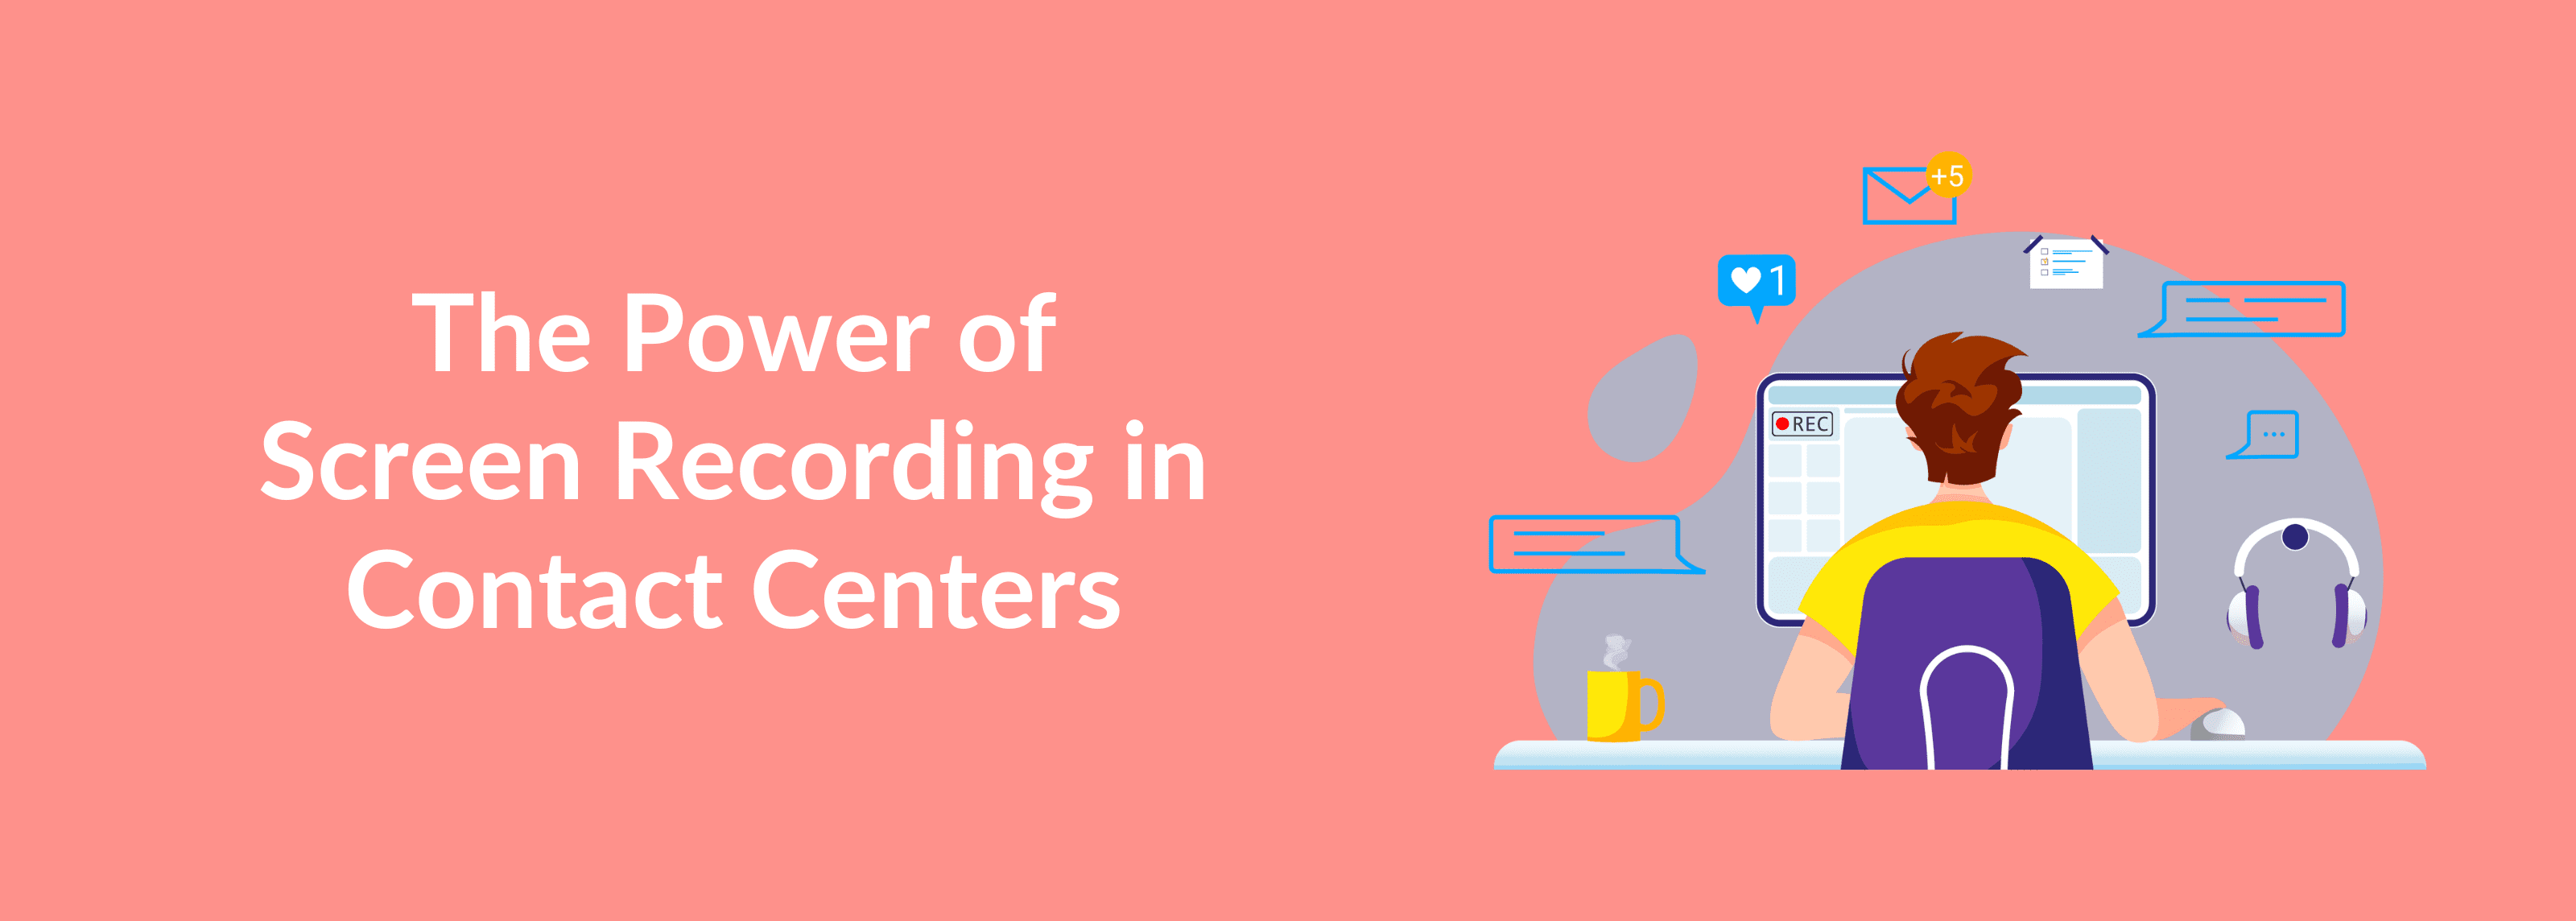 The Power of Screen Recording in Contact Centers